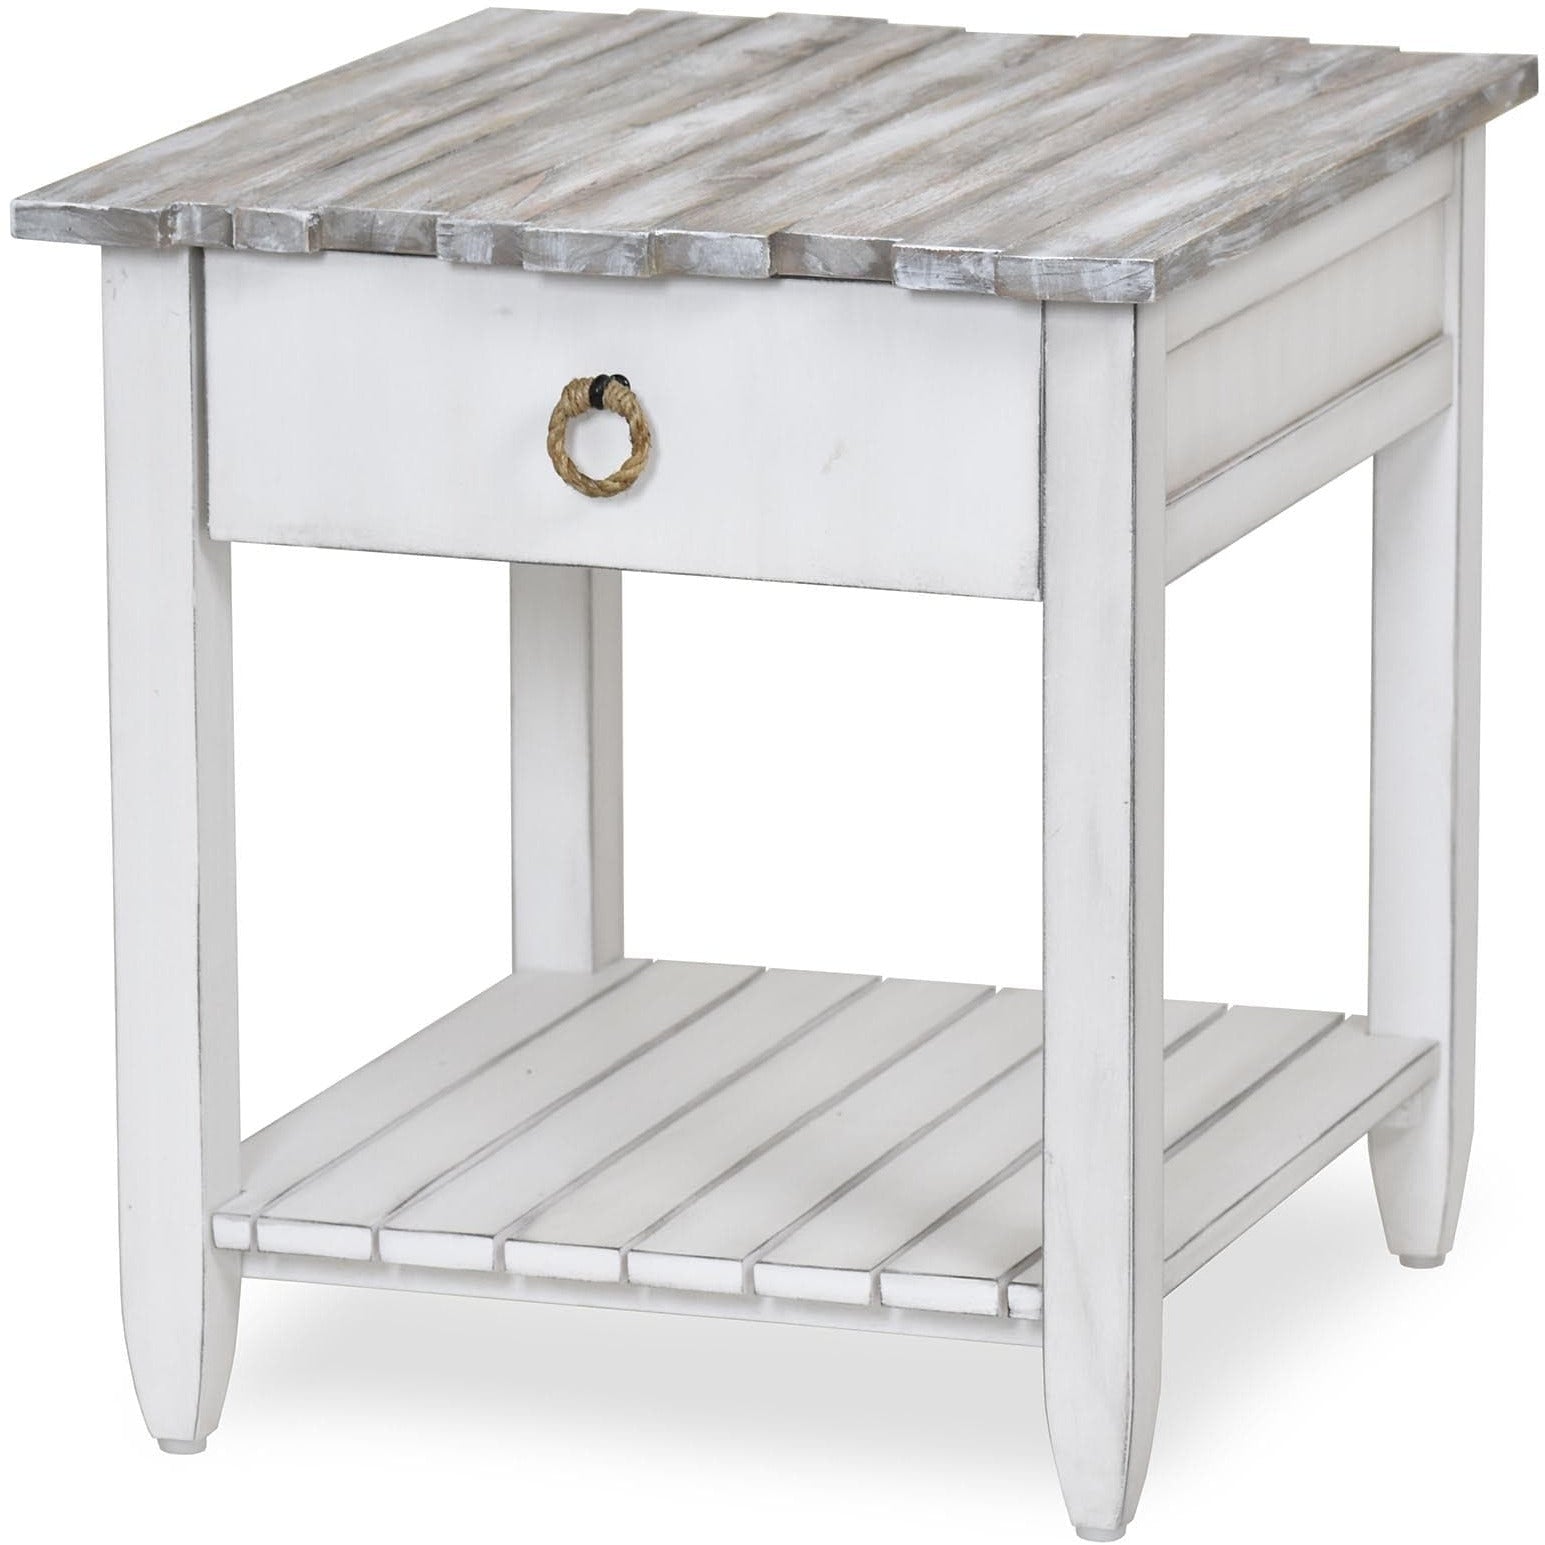 Sea Winds Trading Picket Fence End Table B78202 Indoor Sea Winds Trading Co 